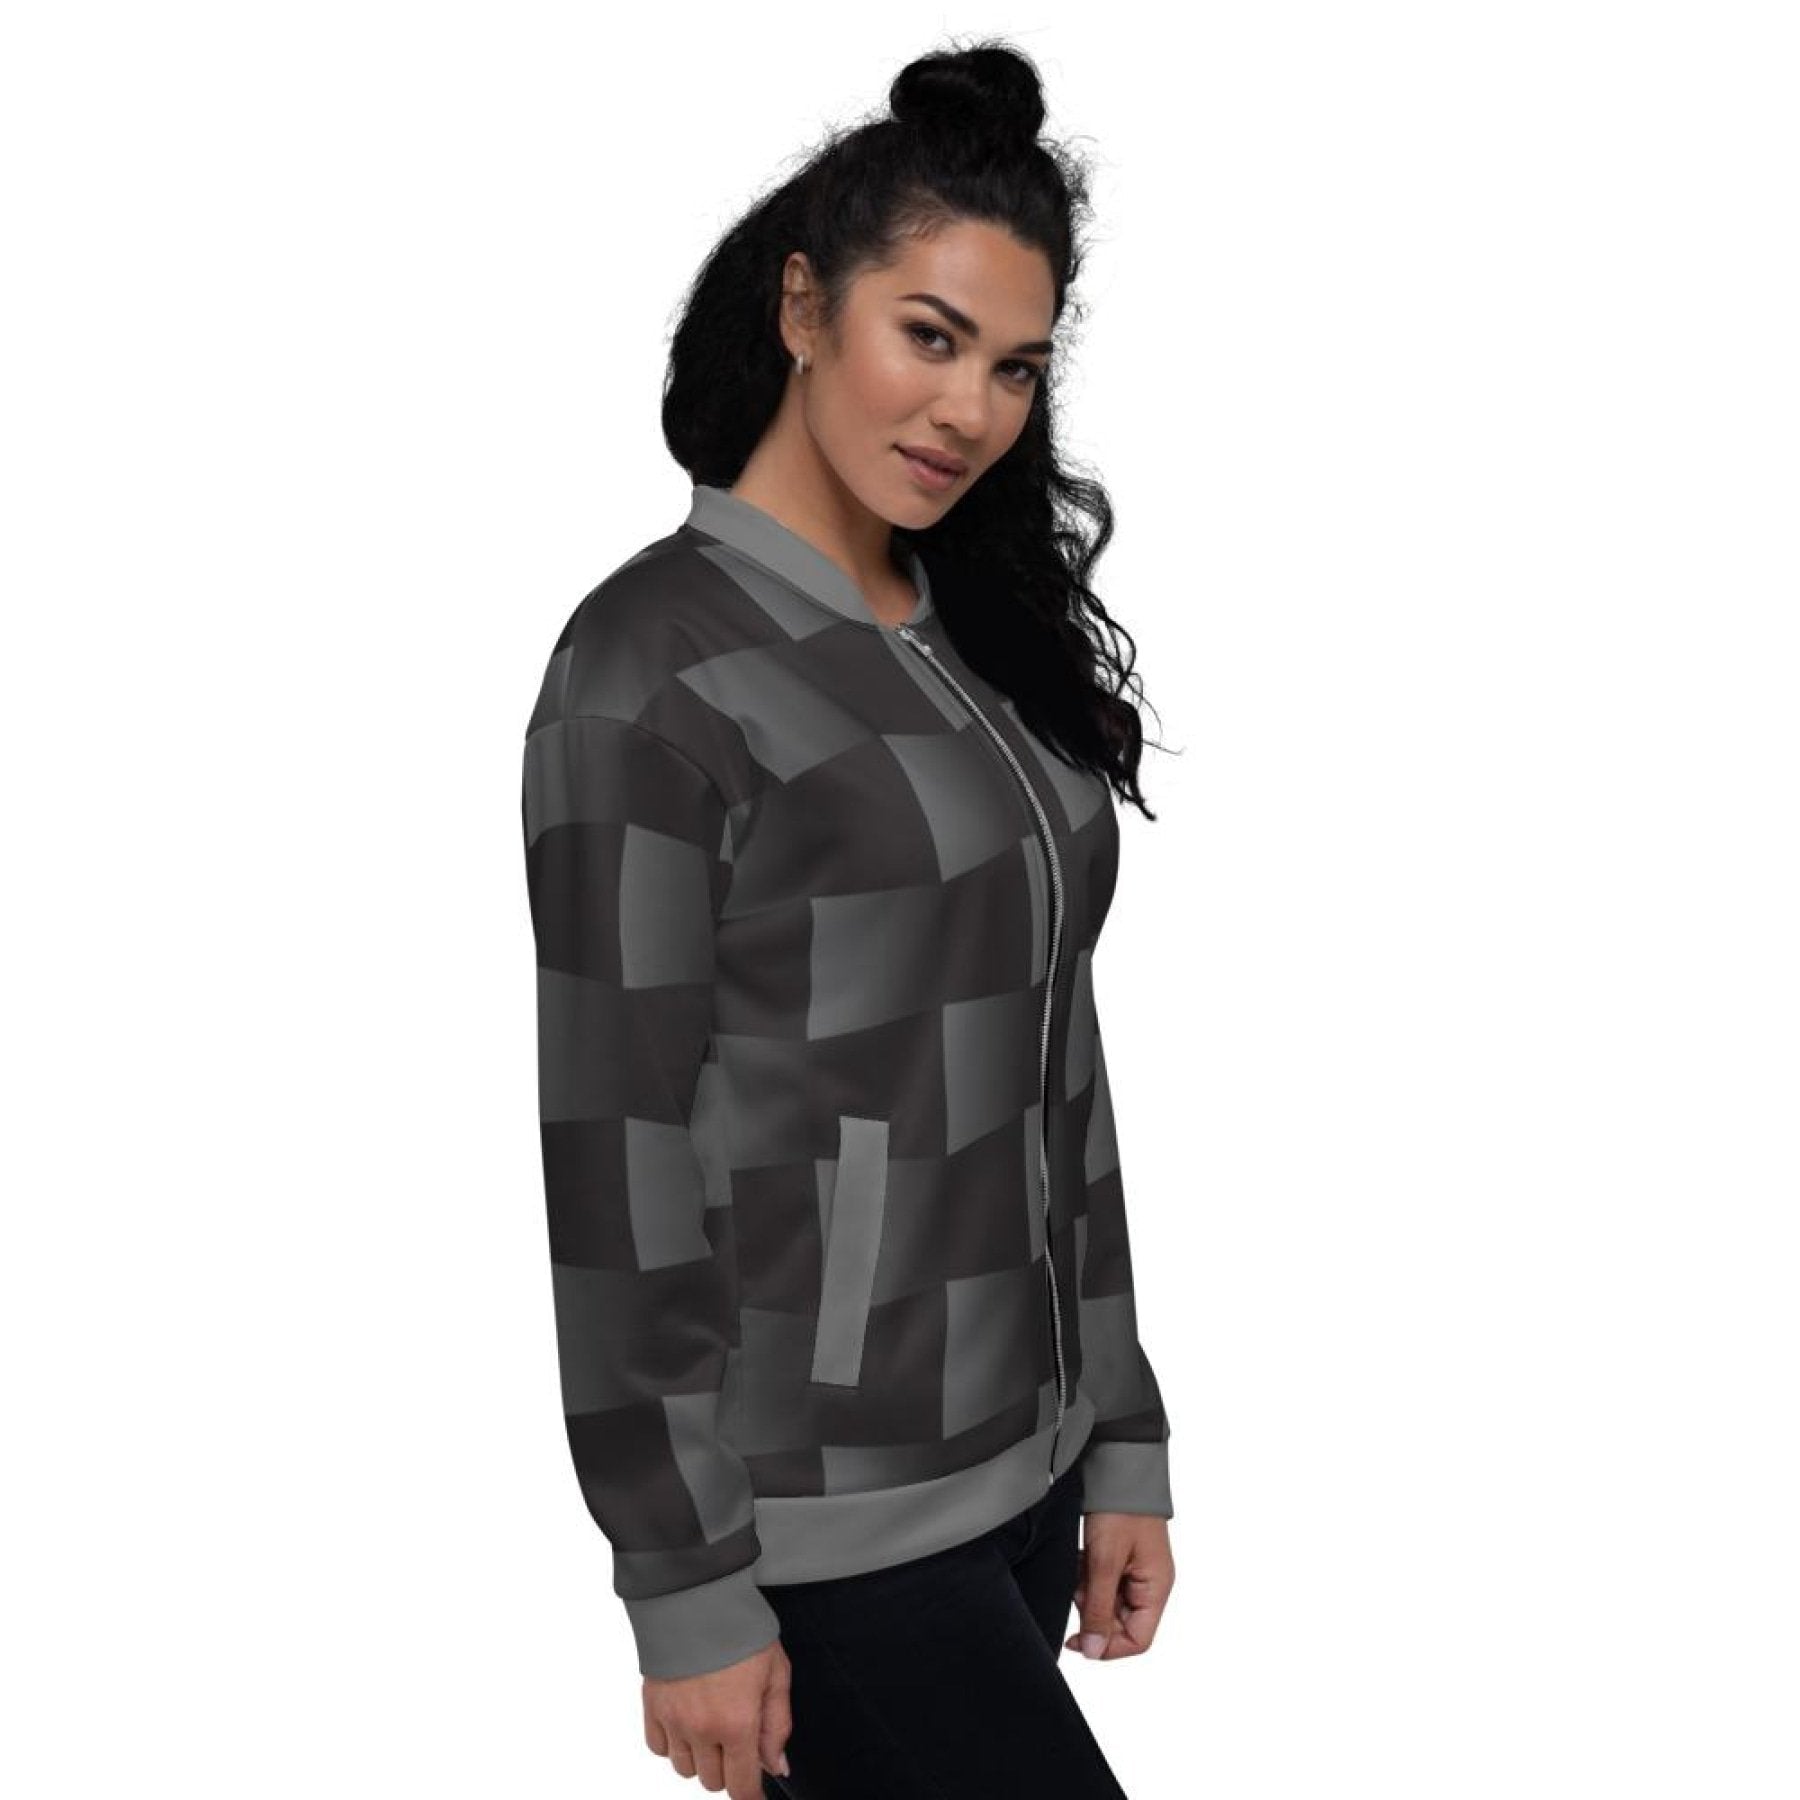 Womens Jacket - Black And Gray 3D Square Style Bomber Jacket - Scarvesnthangs